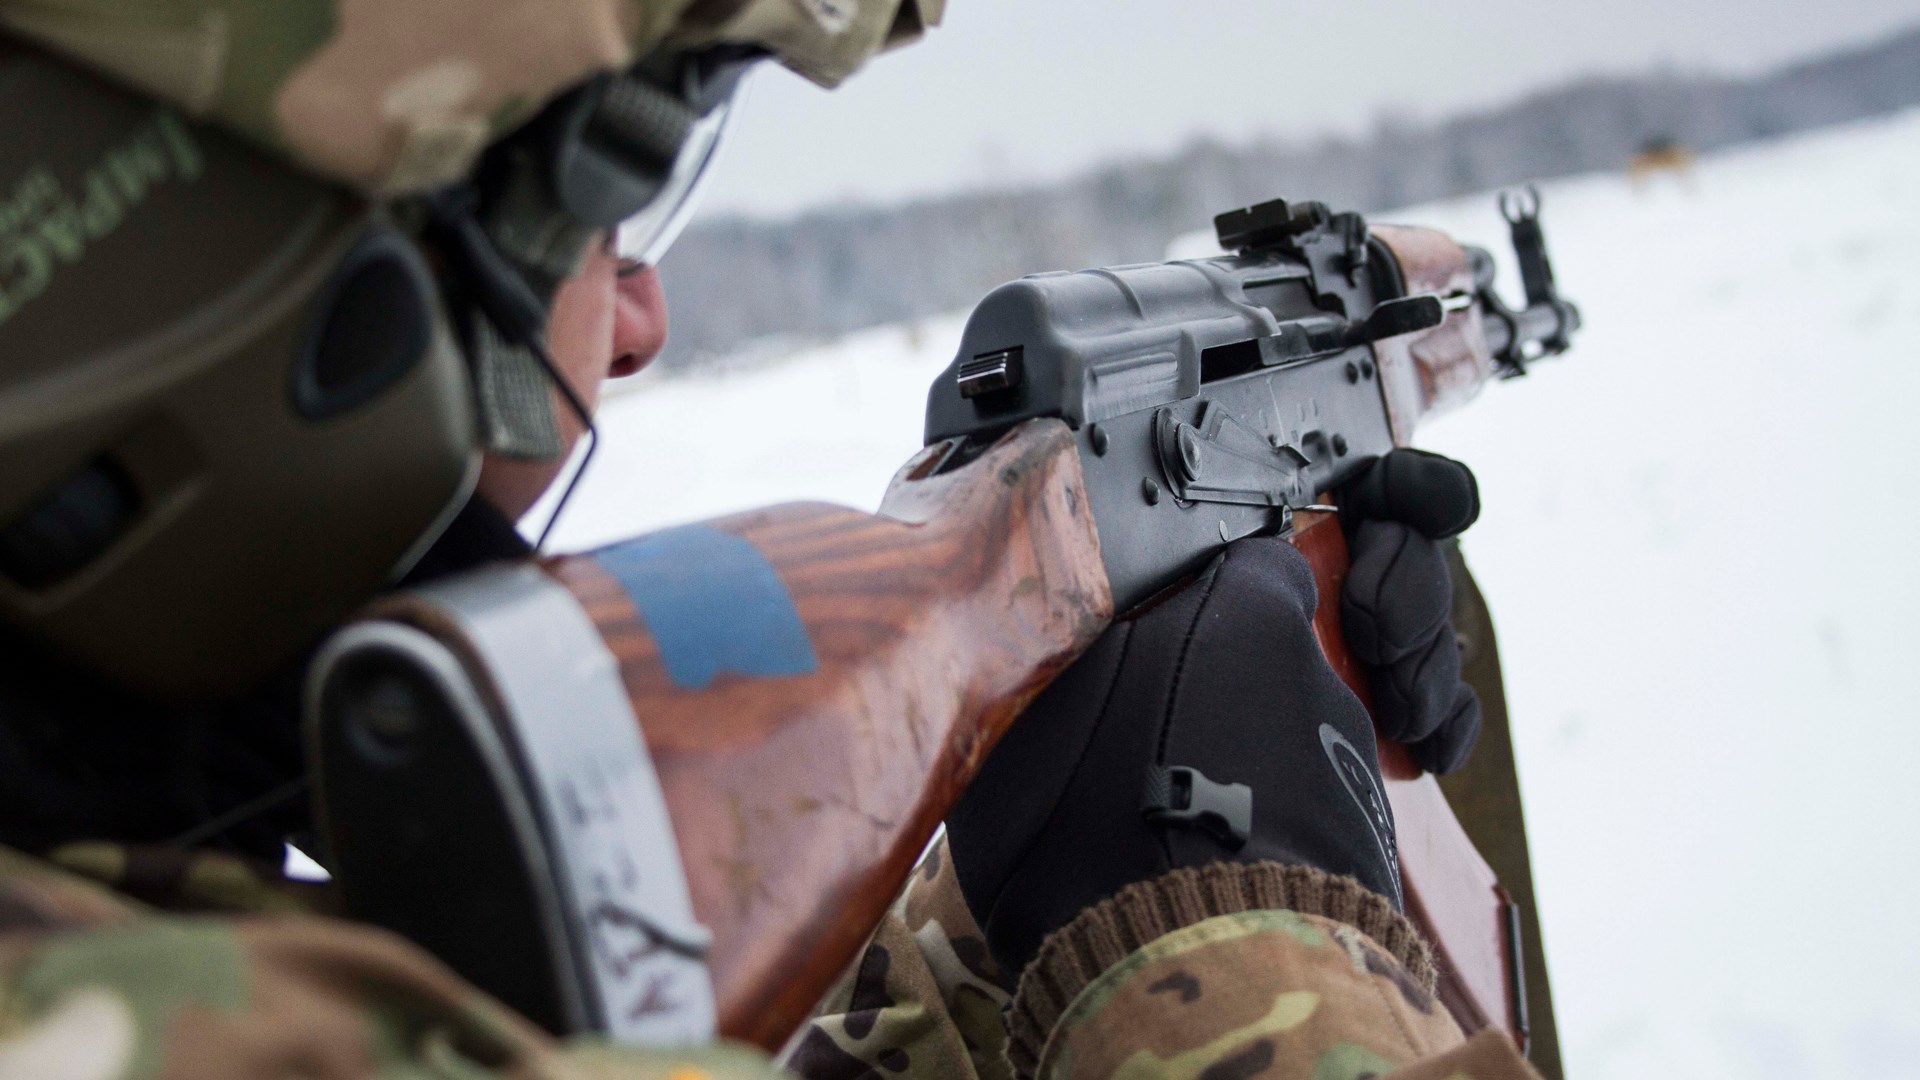 Staff Sgt. Uriah Gibson of Mustang, Oklahoma looks down the sights of an AKM during instructor standardization training at the International Peacekeeping and Security Center, near Yavoriv, Ukraine, on January 19, 2017. (Photo by Sgt. Anthony Jones, 45th Infantry Brigade Combat Team)